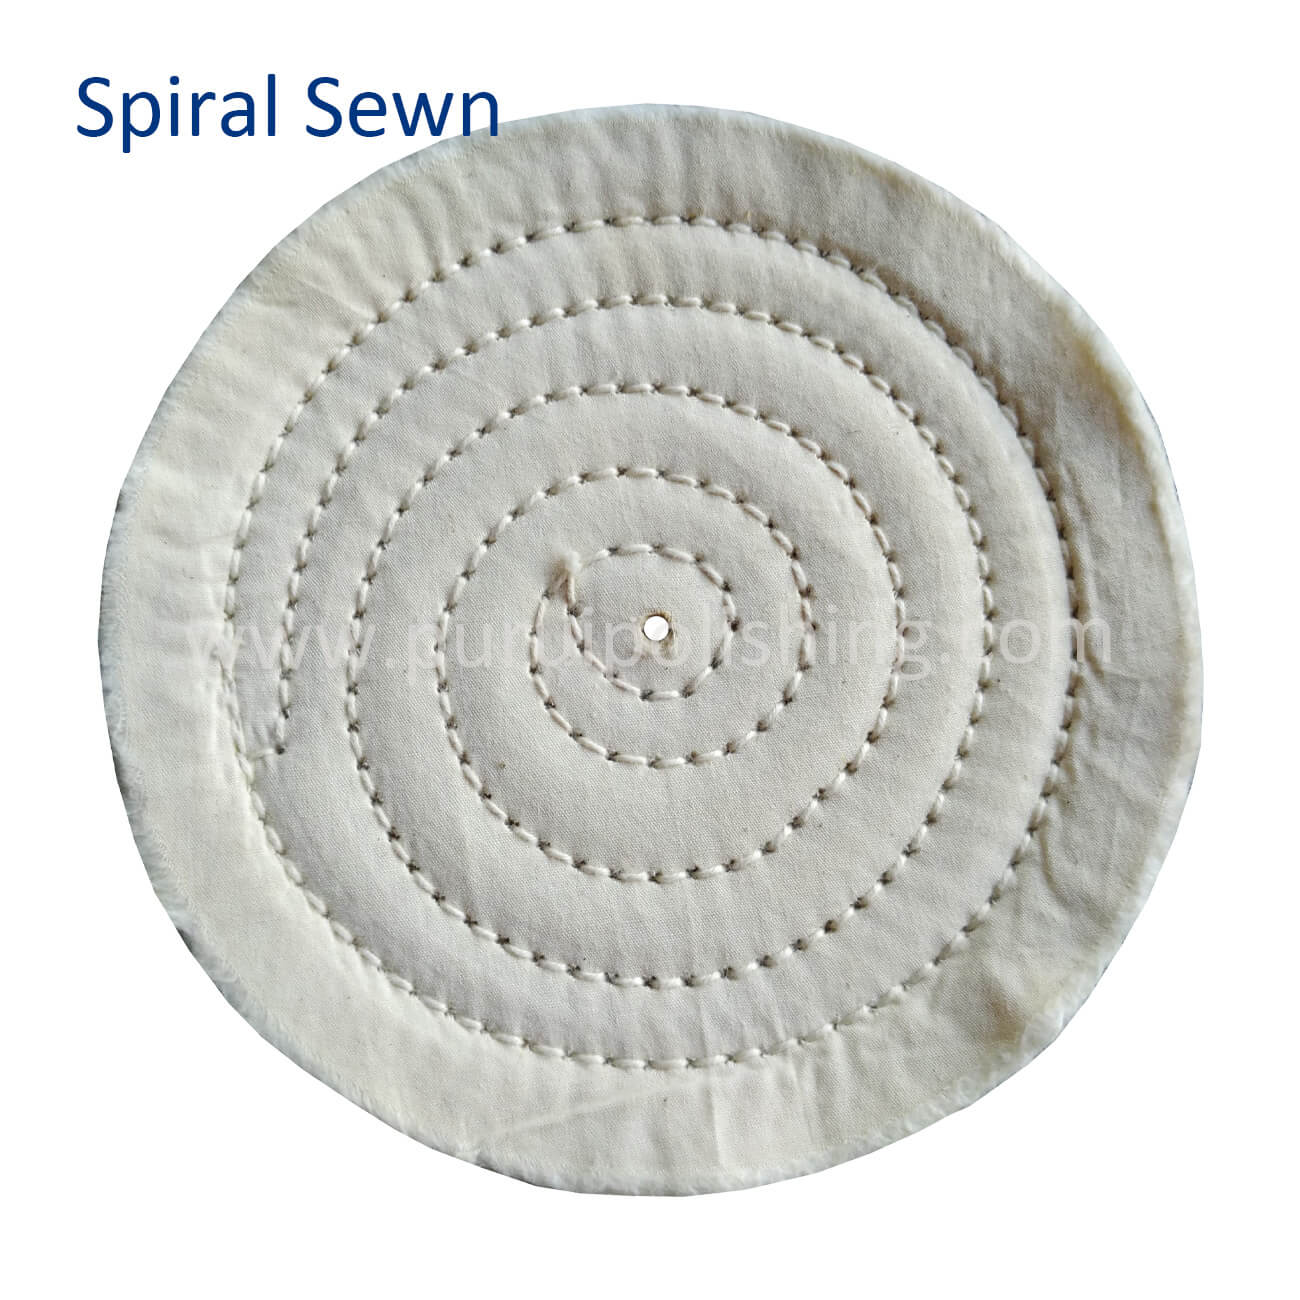 Spiral Sewn of Cotton Buffing Wheel